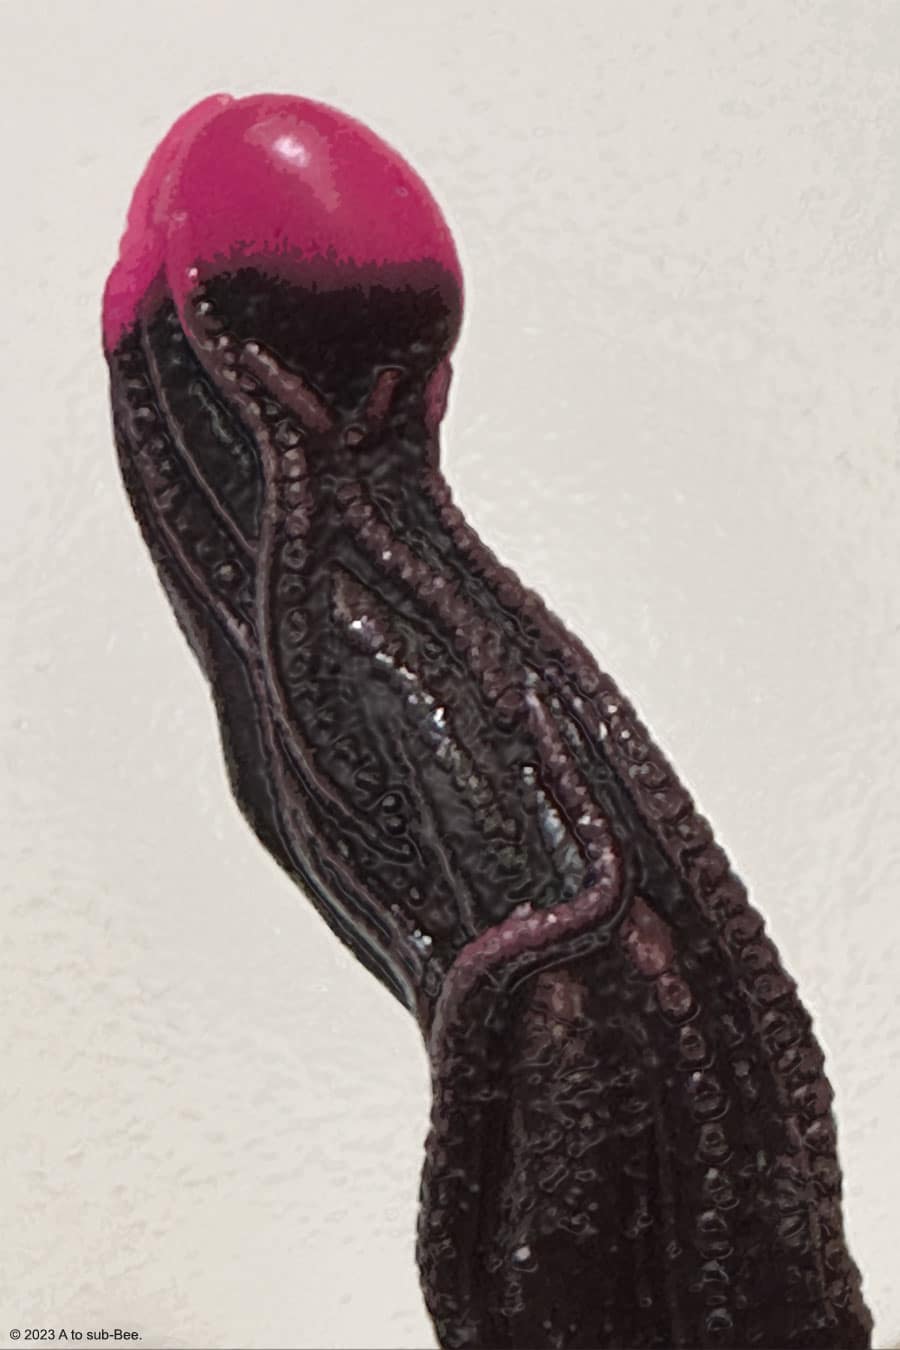 A black tentacle dildo with a pink tip